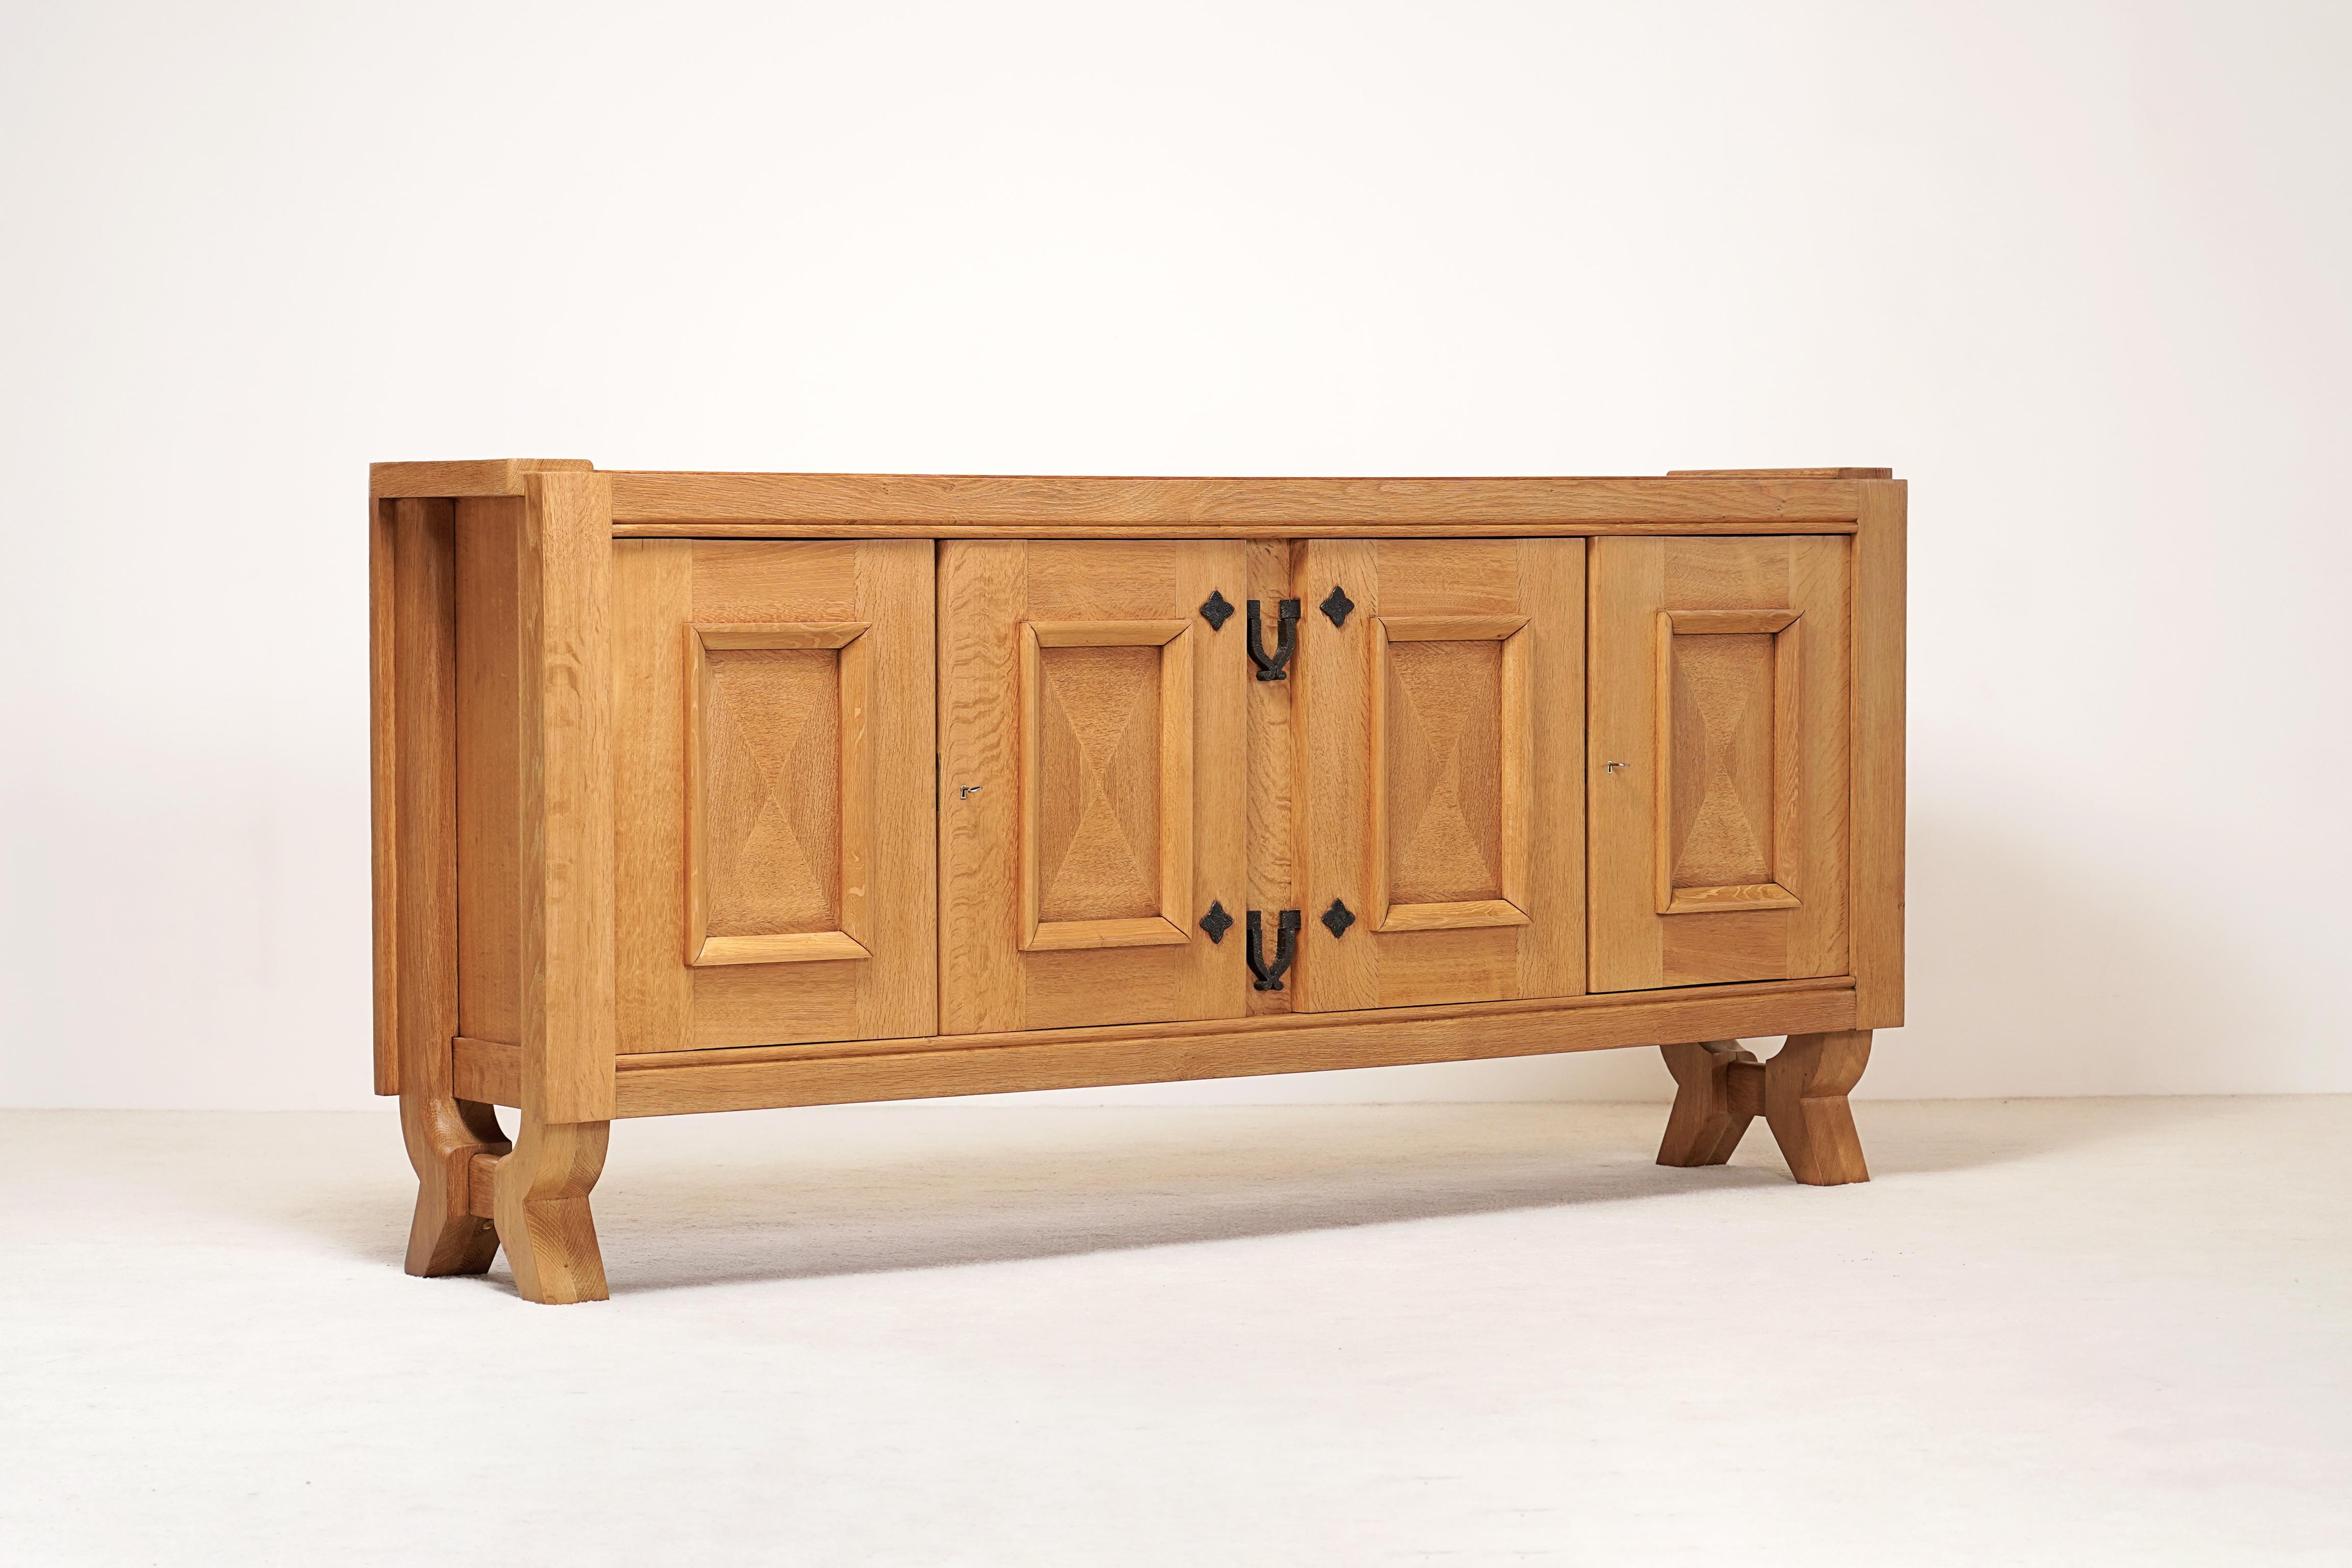 Veneer Guillerme and Chambron, Rare Early Period Sideboard for Votre Maison